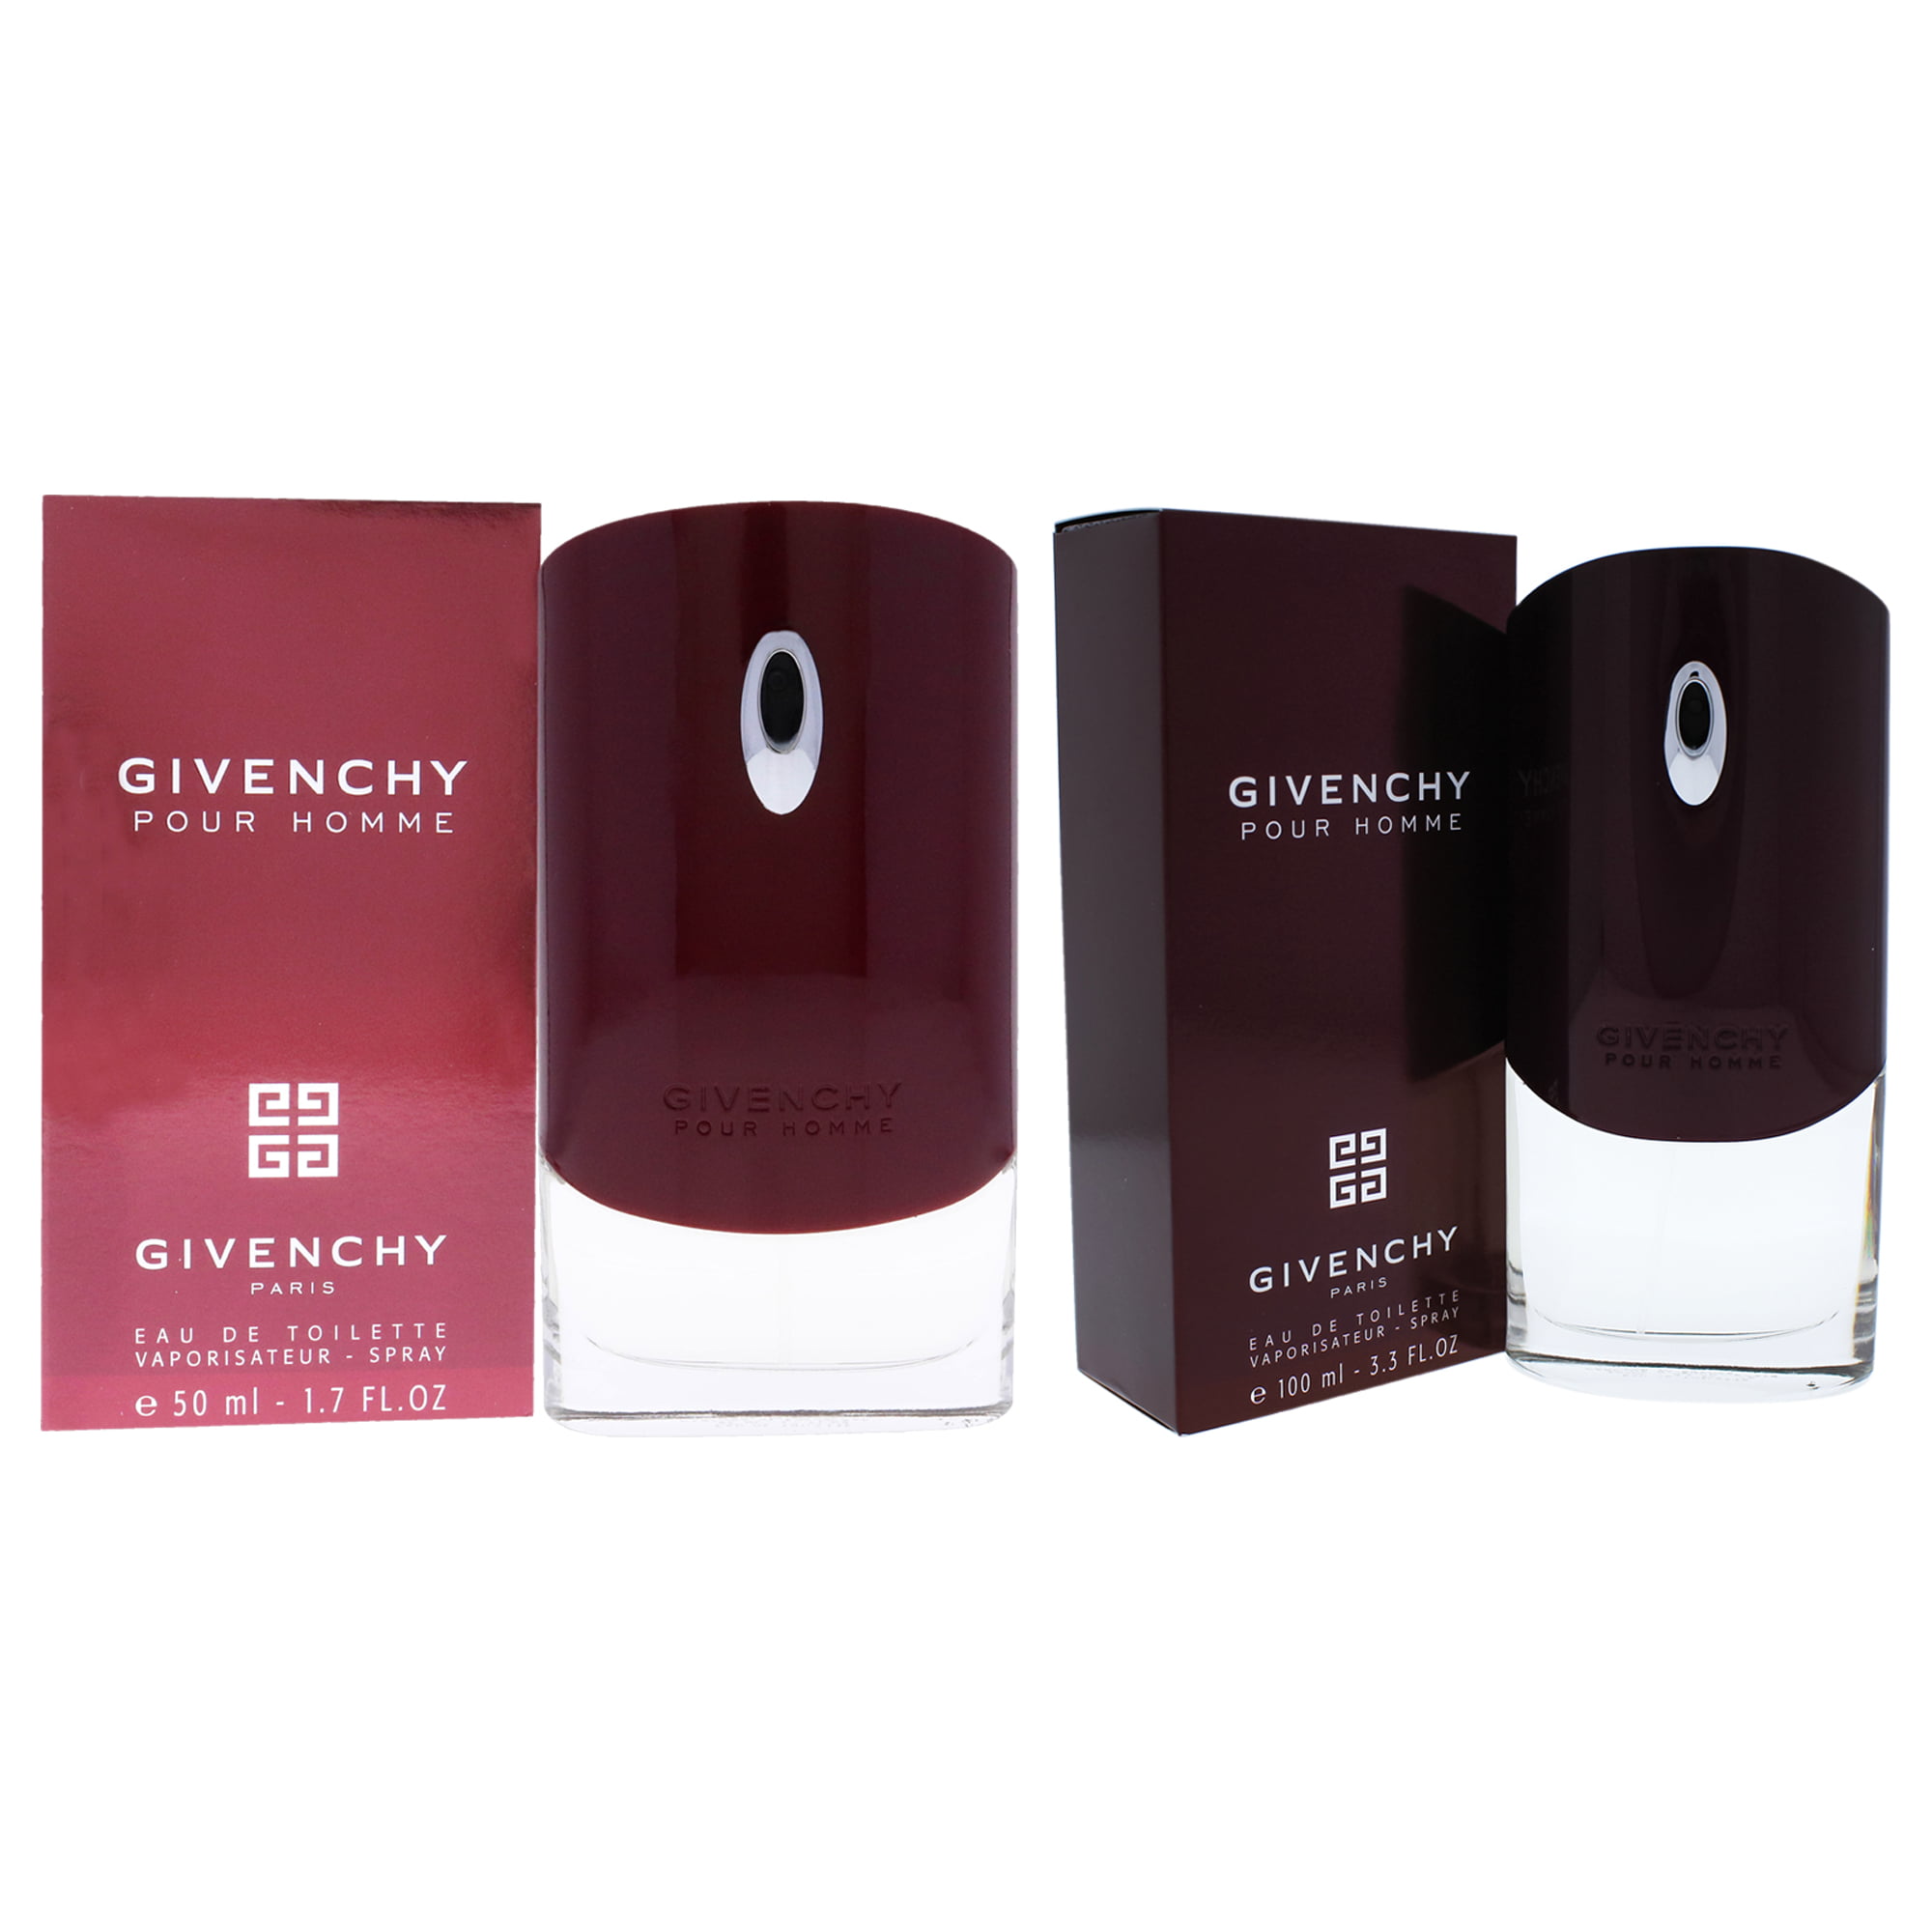 Givenchy pour homme коробка. Givenchy pour homme Blue Label. Реплика Givenchy pour homme. Живанши Пьюр хоум. Pure homme